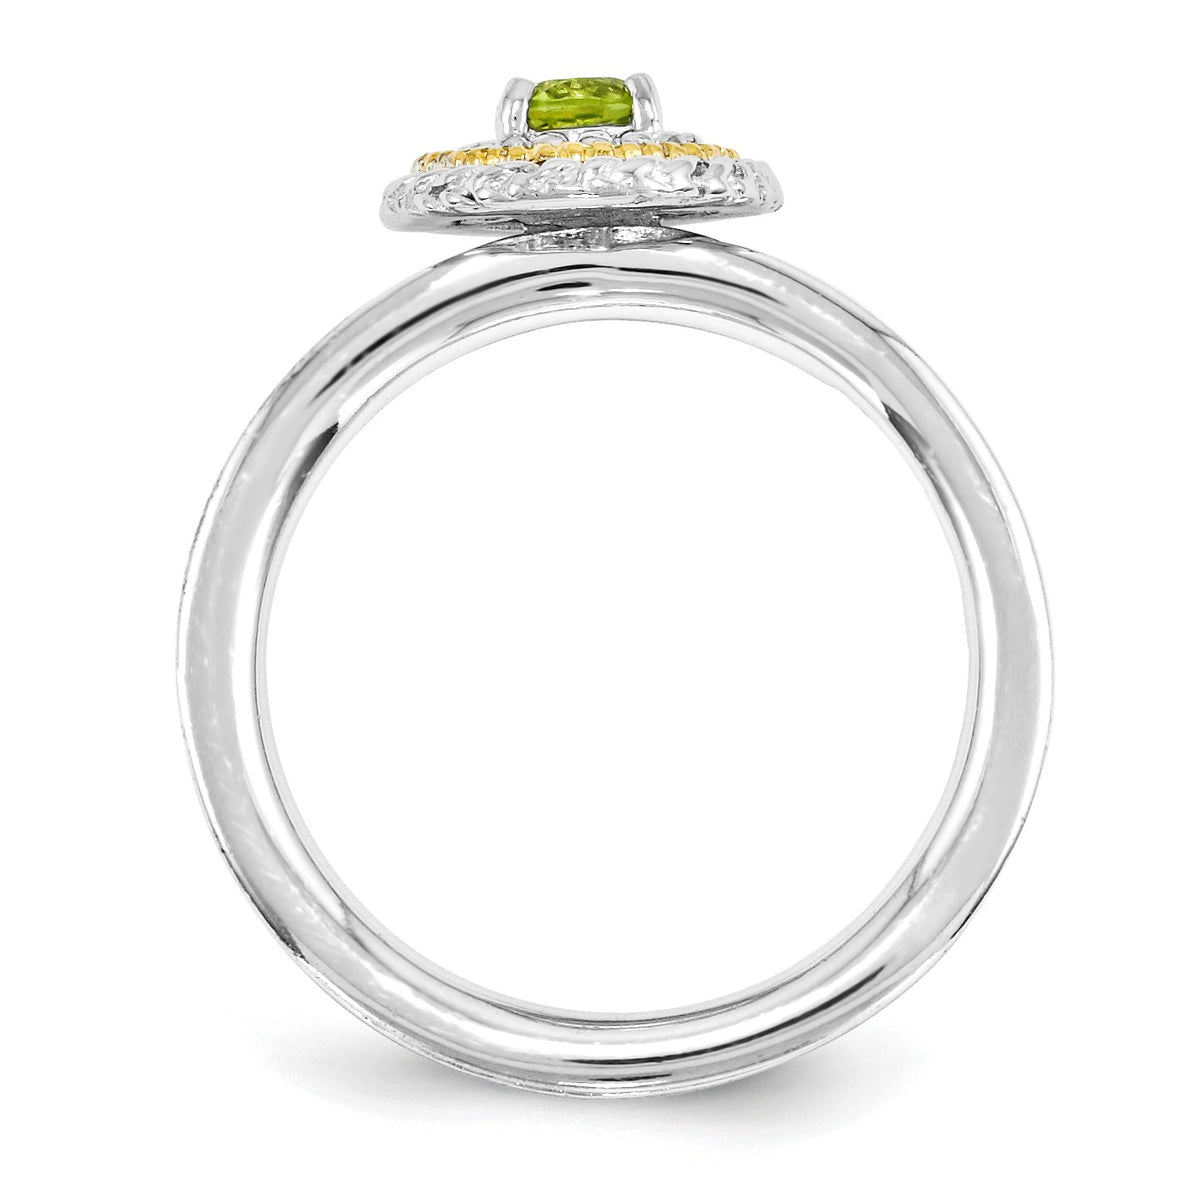 Alternate view of the Sterling Silver &amp; 14K Gold Plated Stackable Peridot Ring by The Black Bow Jewelry Co.